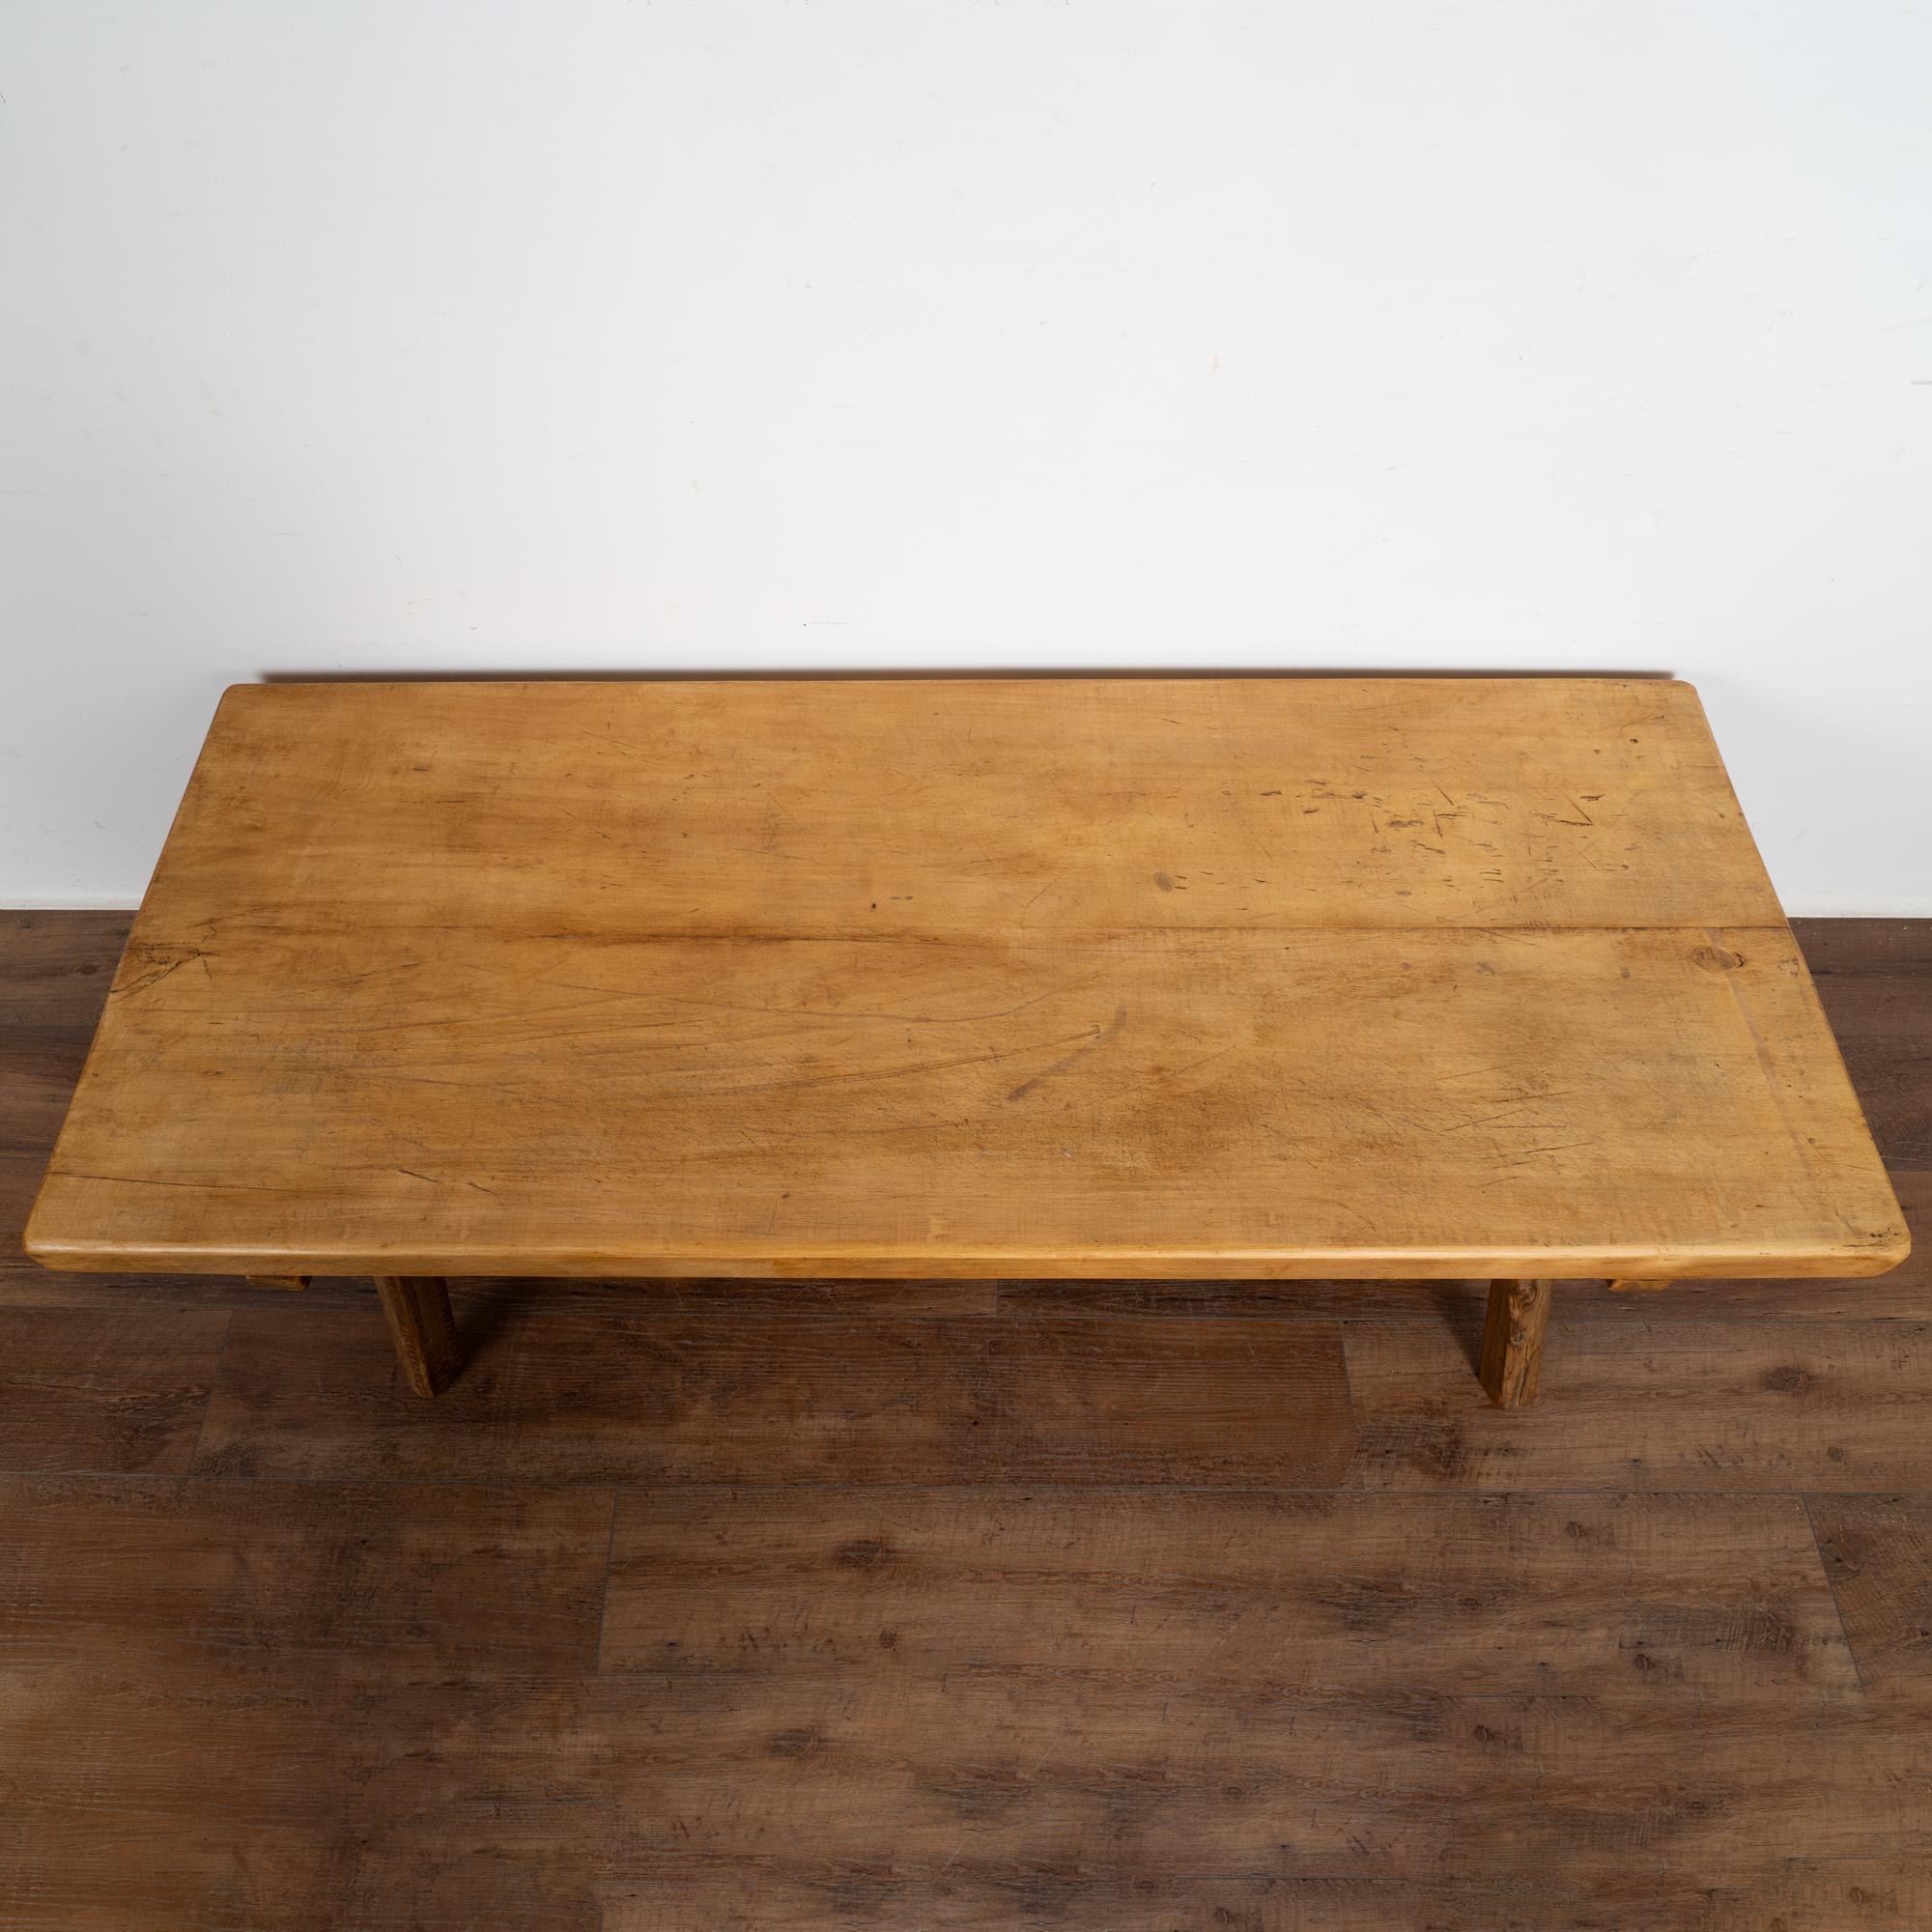 Hungarian Rustic Coffee Table With Peg Legs, Hungary circa 1900 For Sale